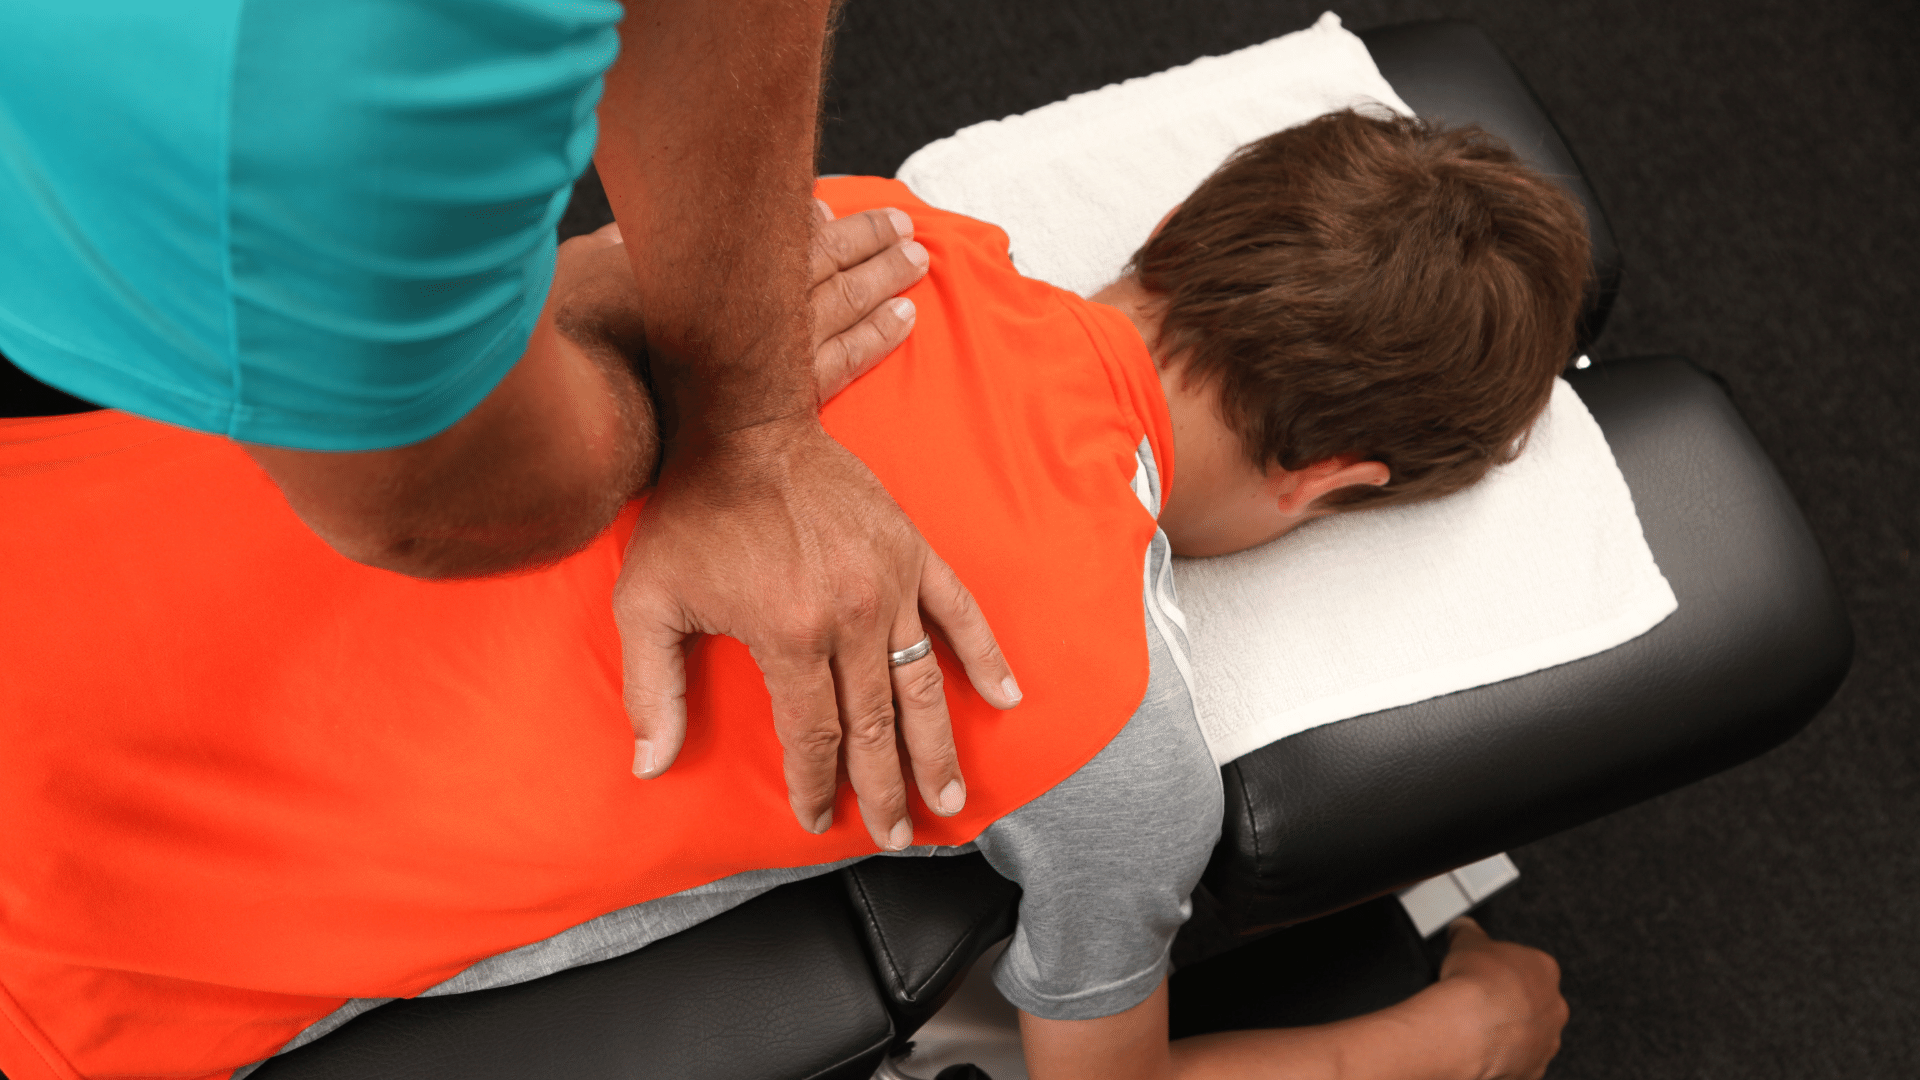 child receiving chiropractic care